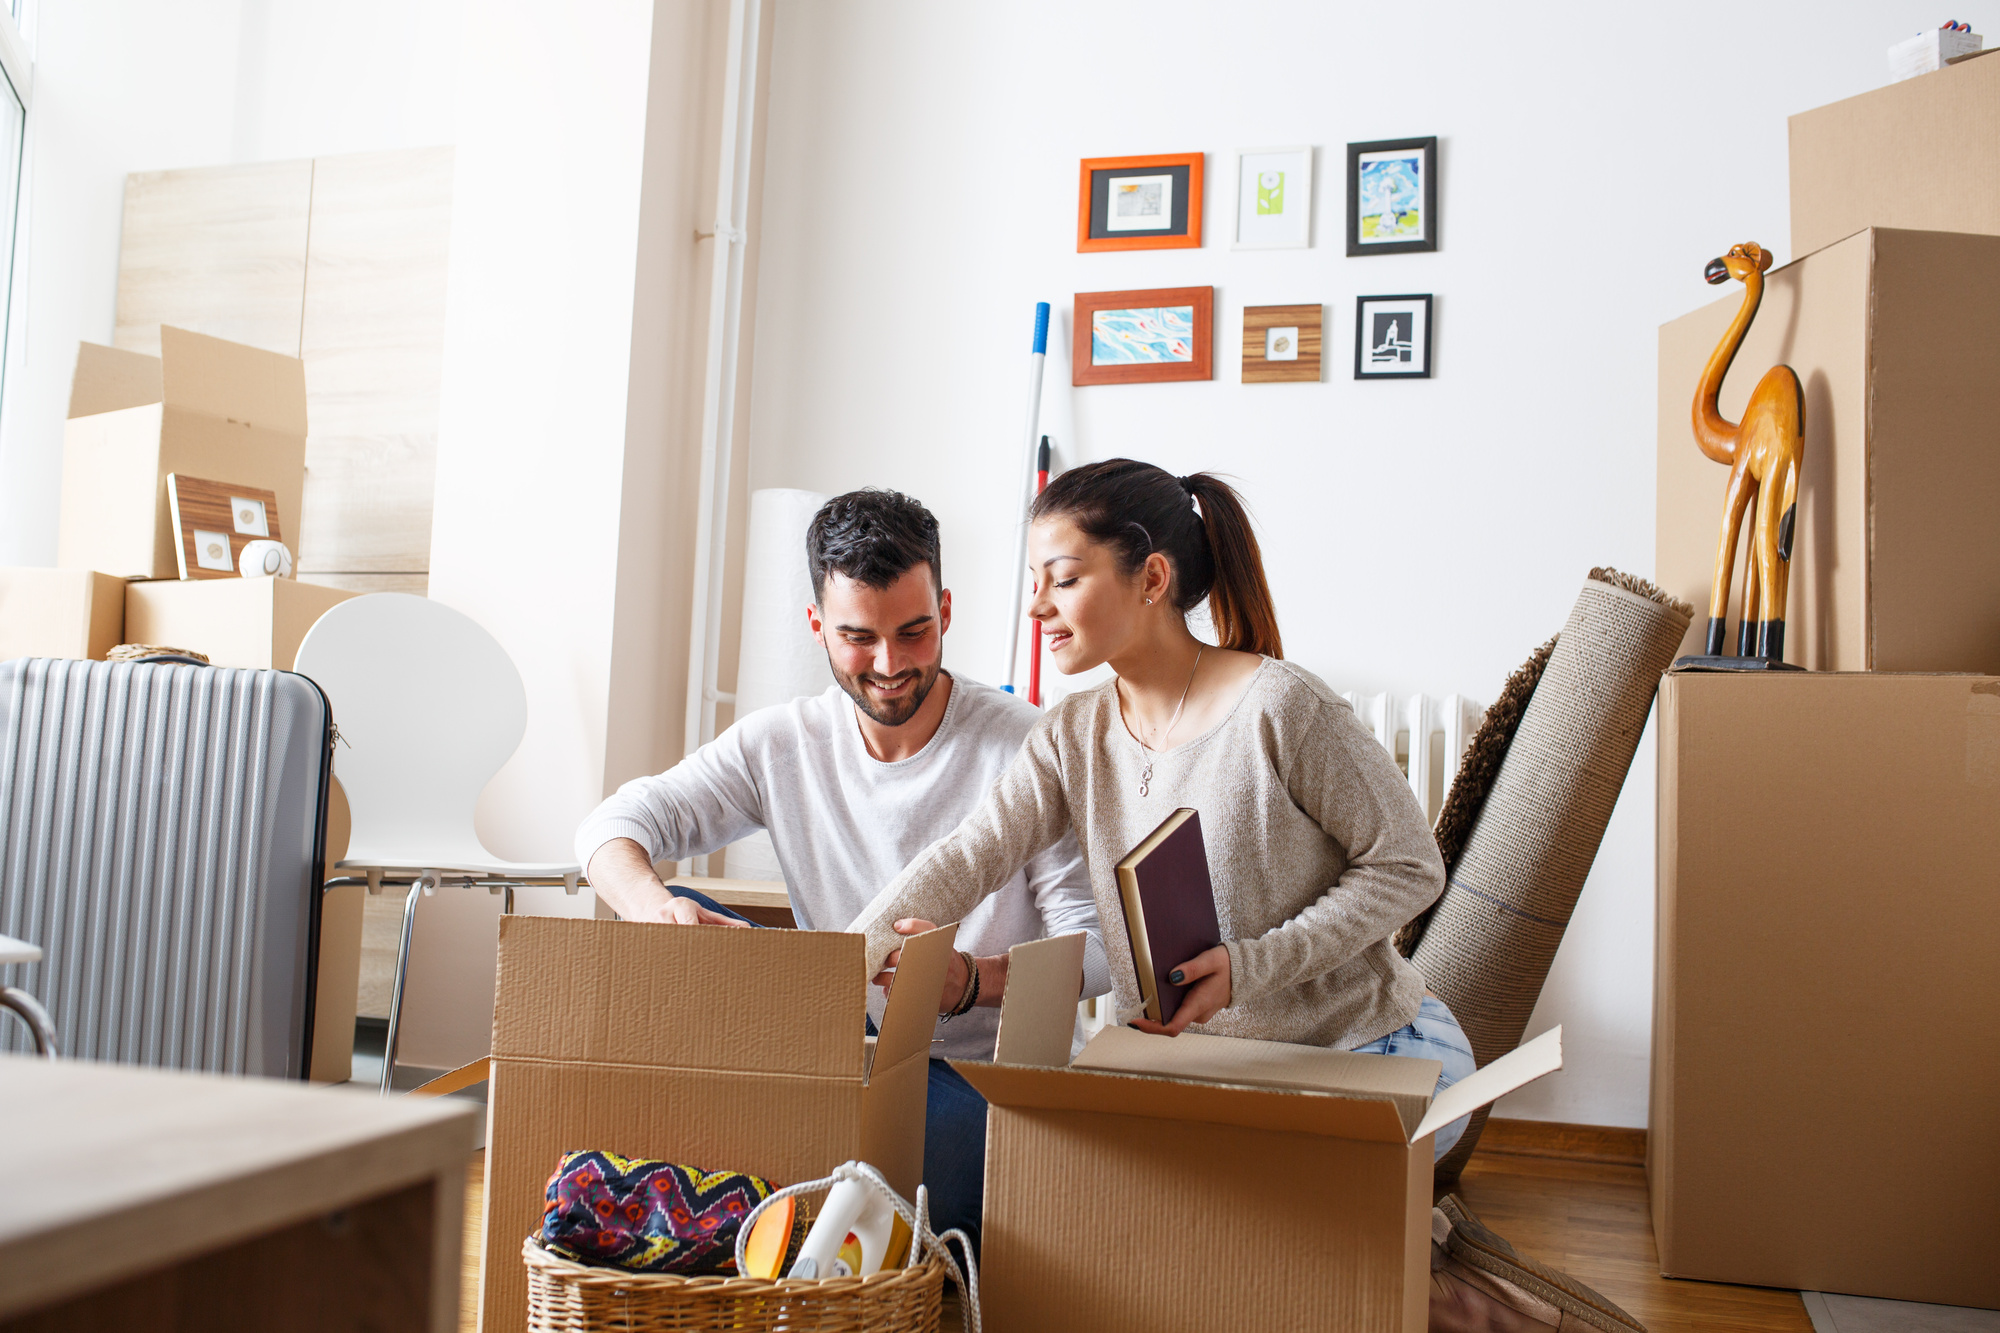 What Are the Benefits of Marketing Your Moving Company?